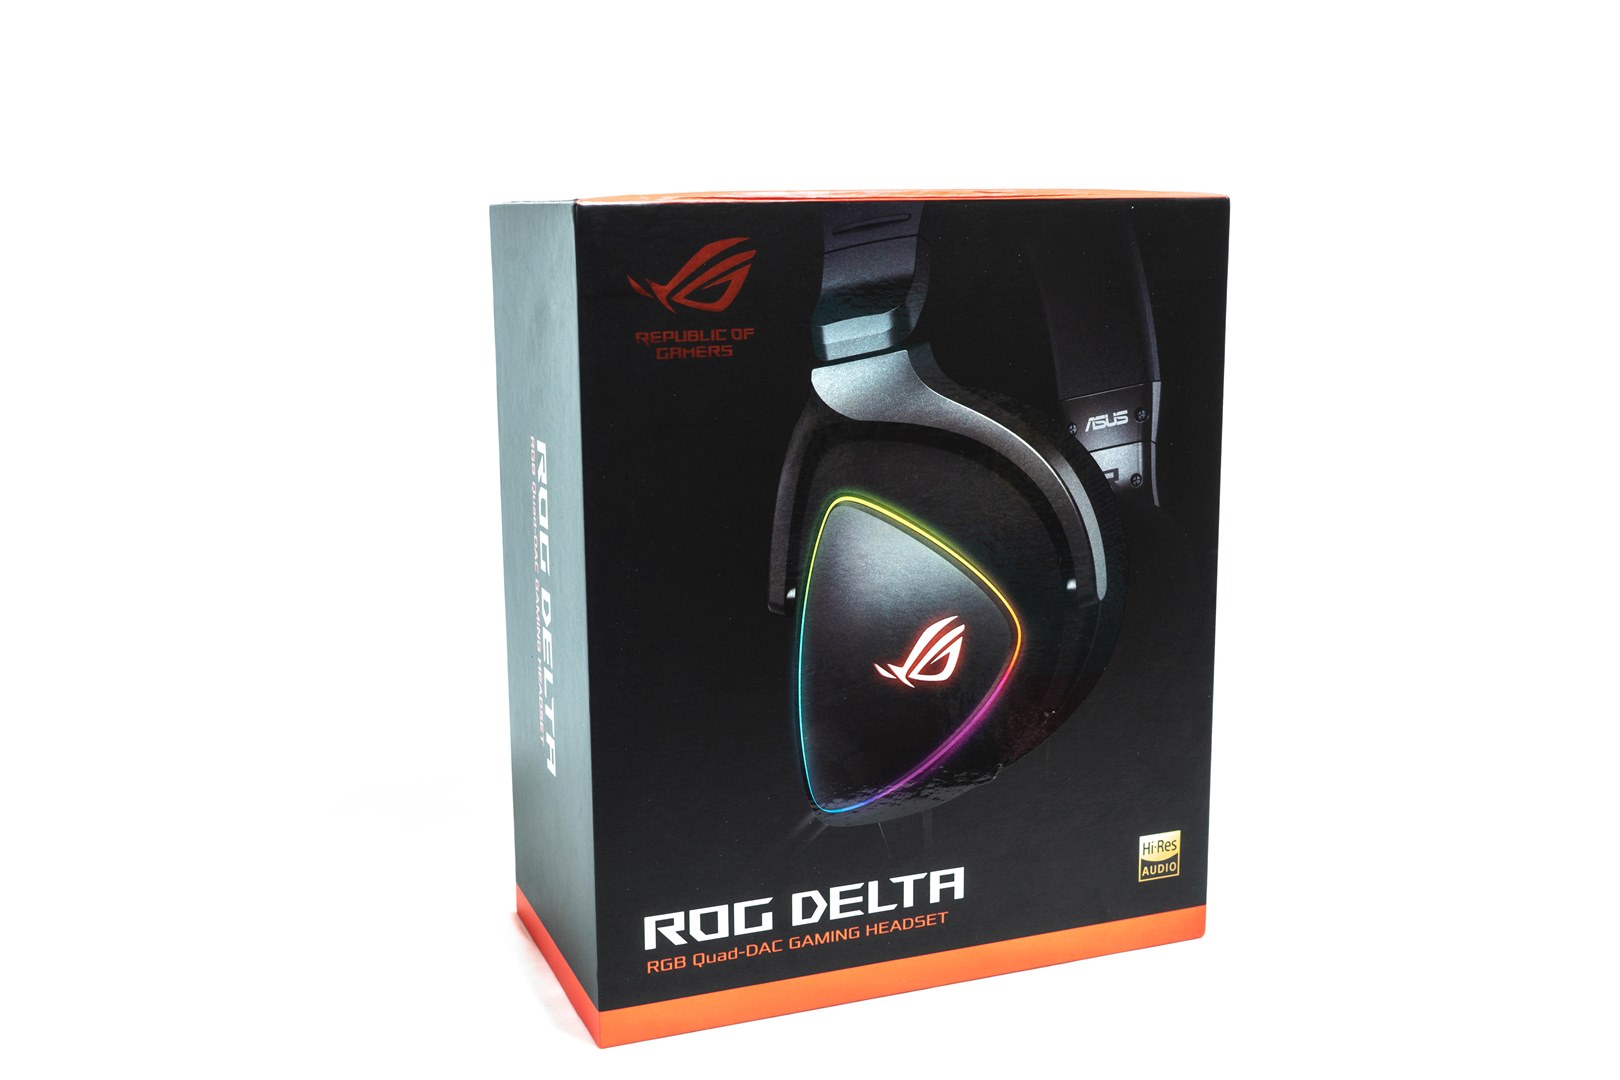 THE ULTIMATE PURSUIT IN ESPORTS! ASUS ROG DELTA GAMING HEADSET 